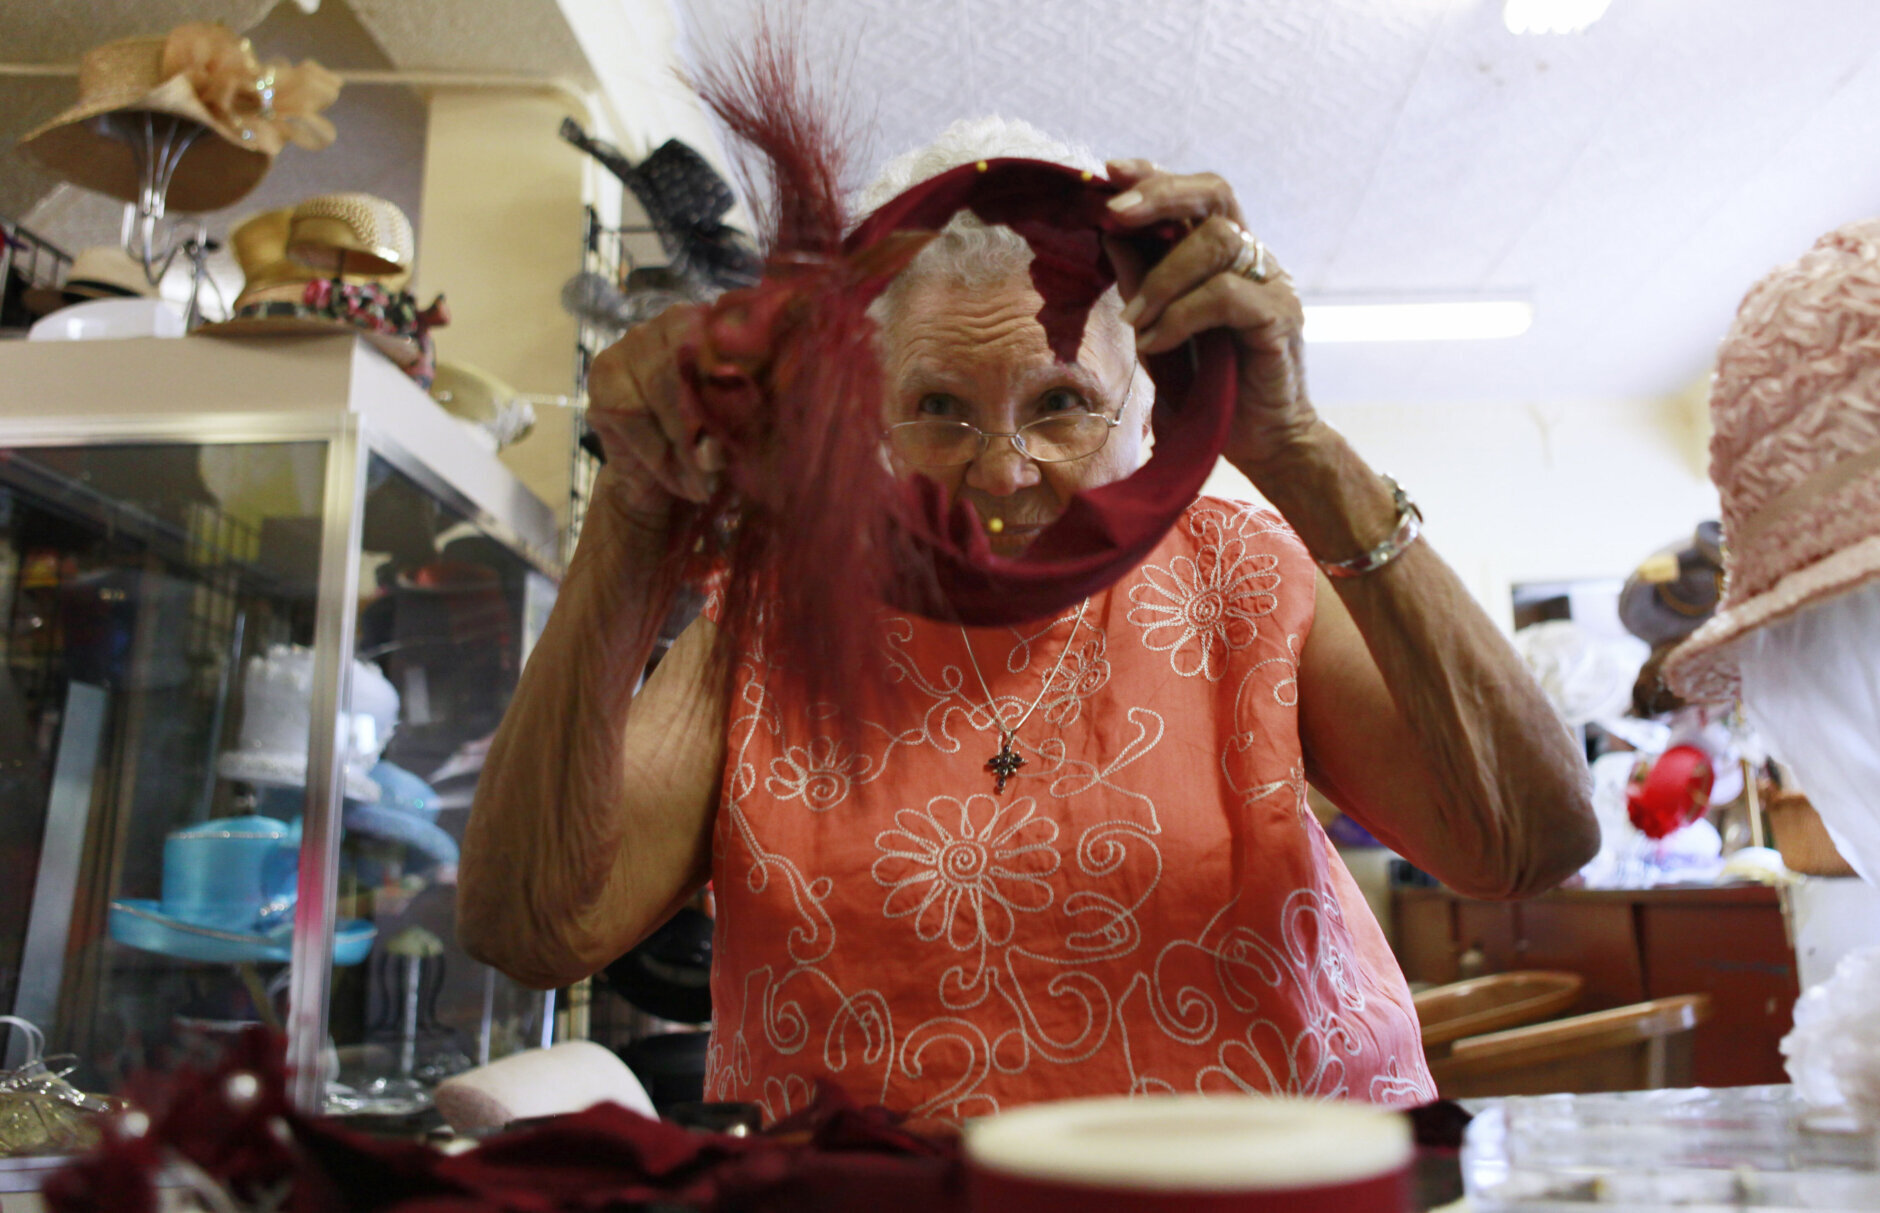 100-year-old D.C. hat maker still loving her craft, 40 years after